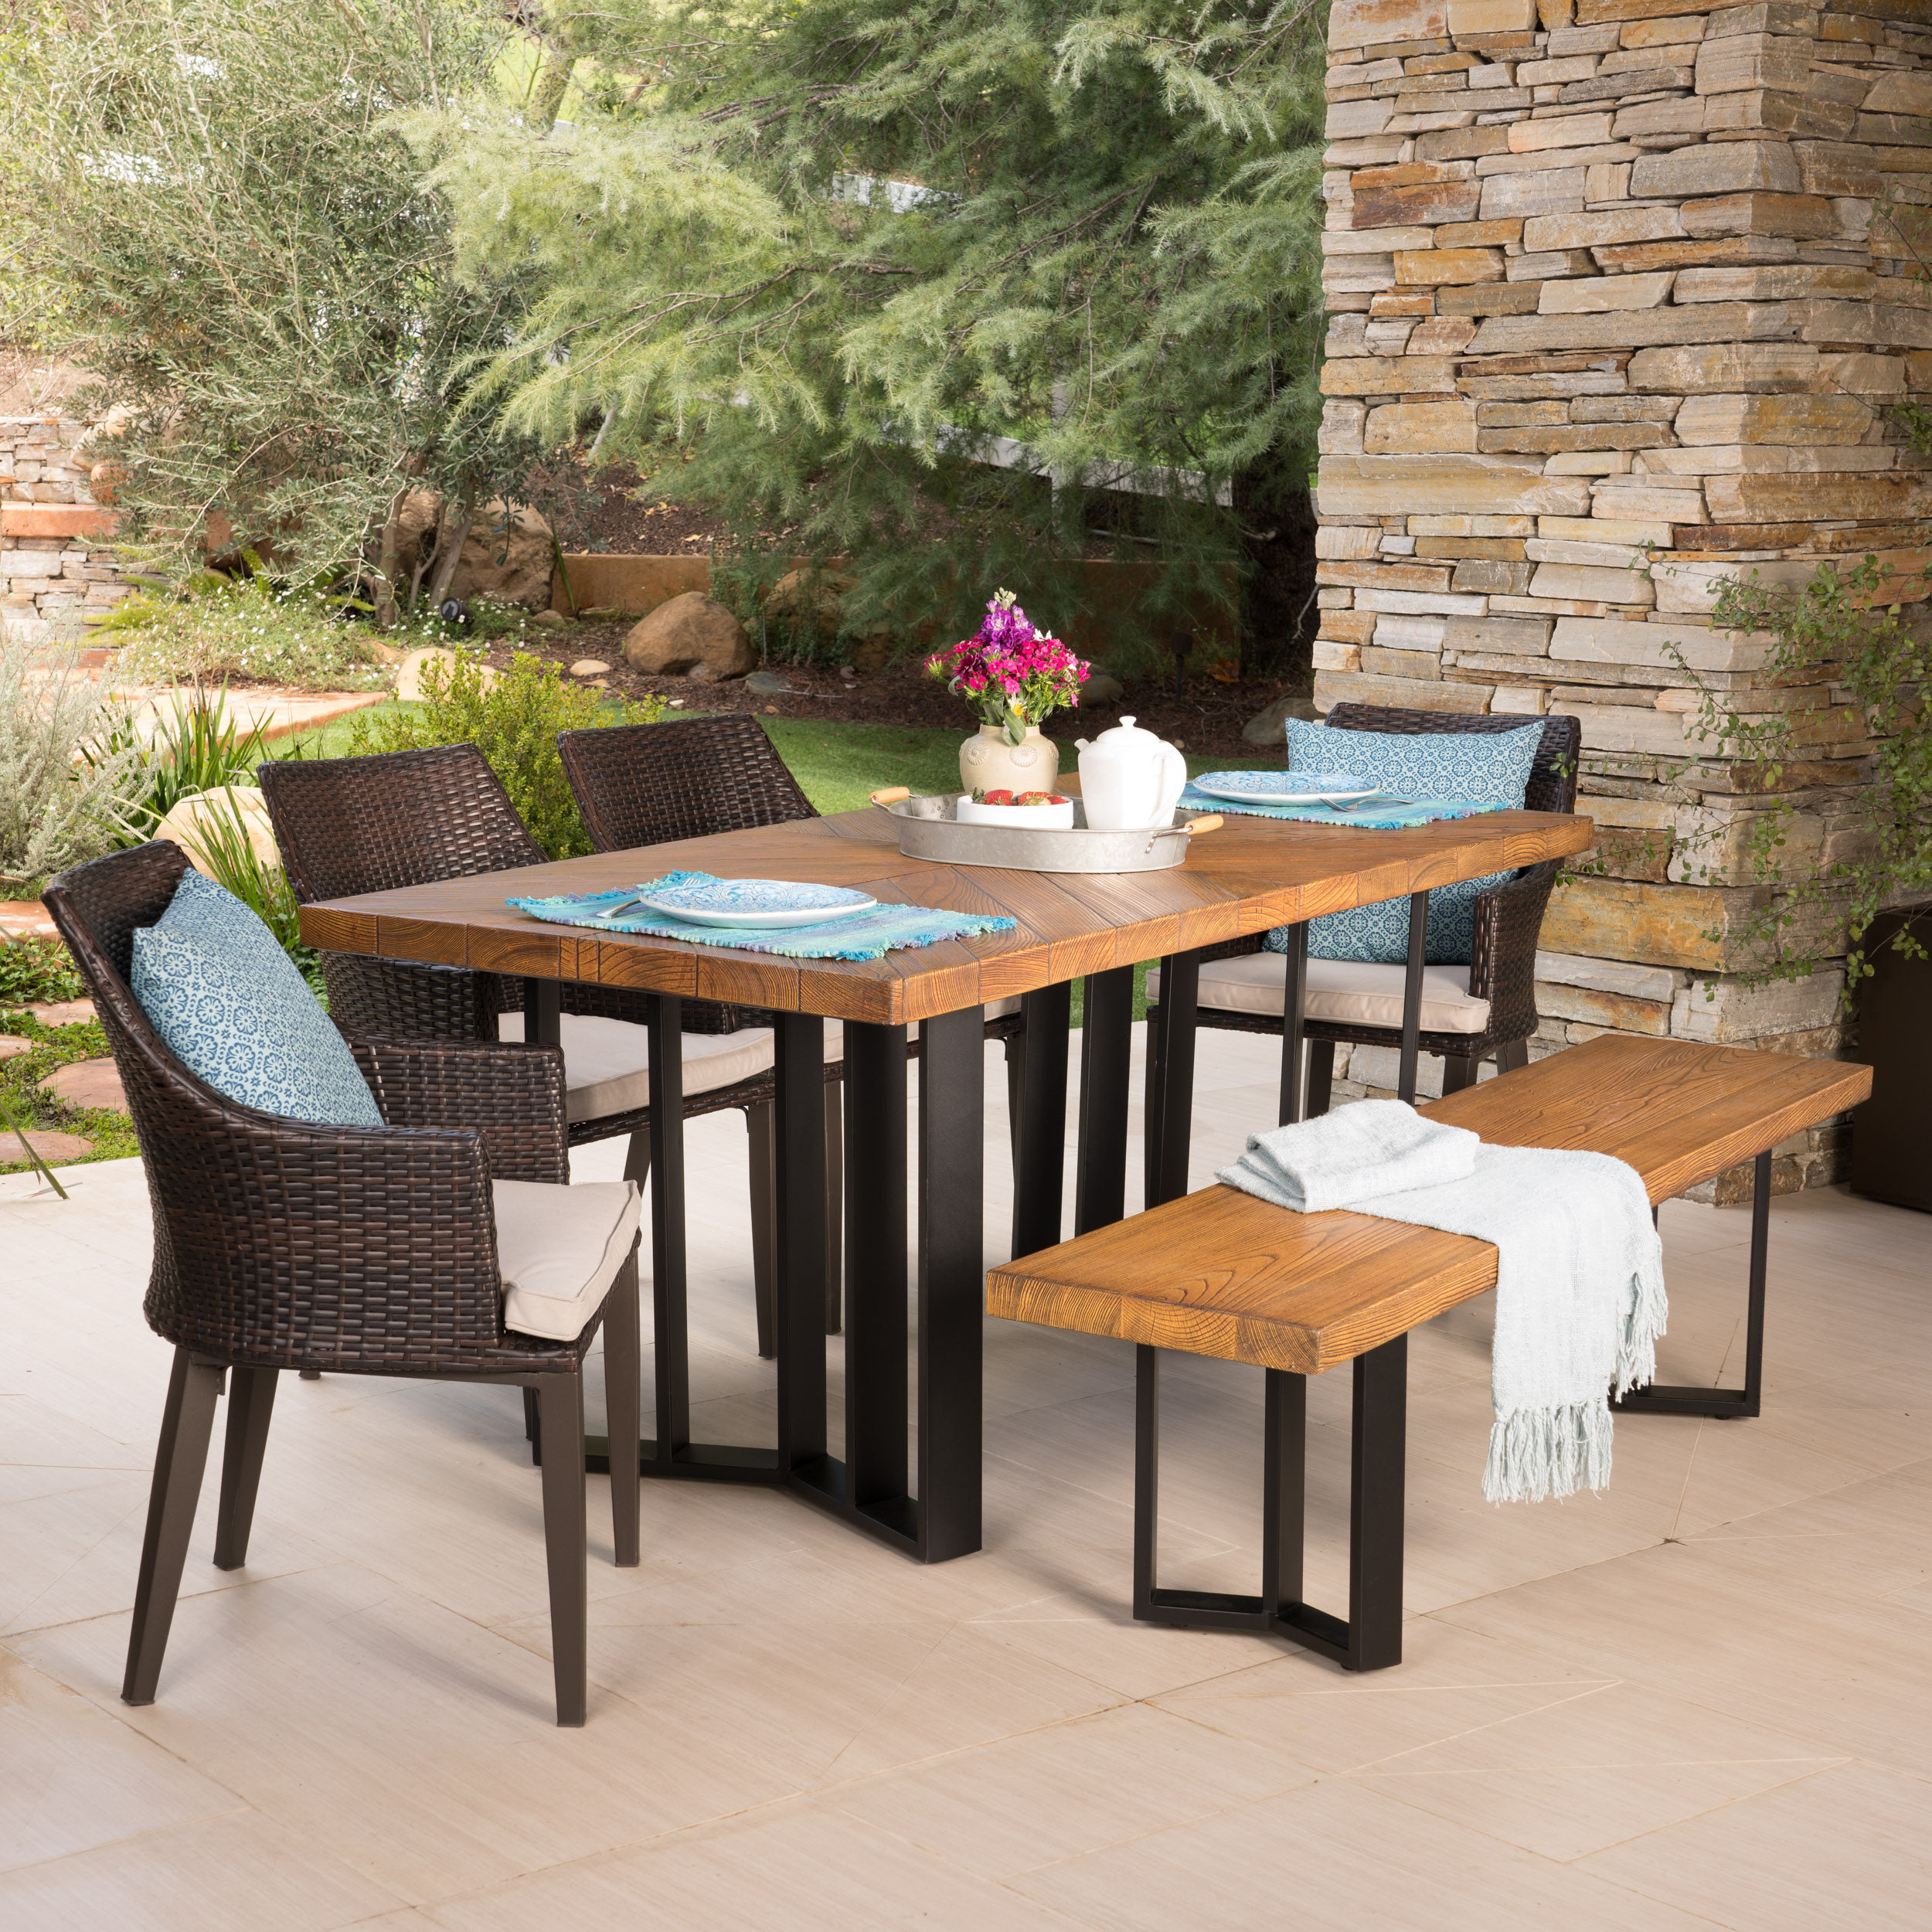 GDF Studio Sayveon Outdoor Wicker and Lightweight Concrete 6 Piece Dining Set with Bench, Textured Brown Walnut, Multibrown, and Black - image 2 of 13